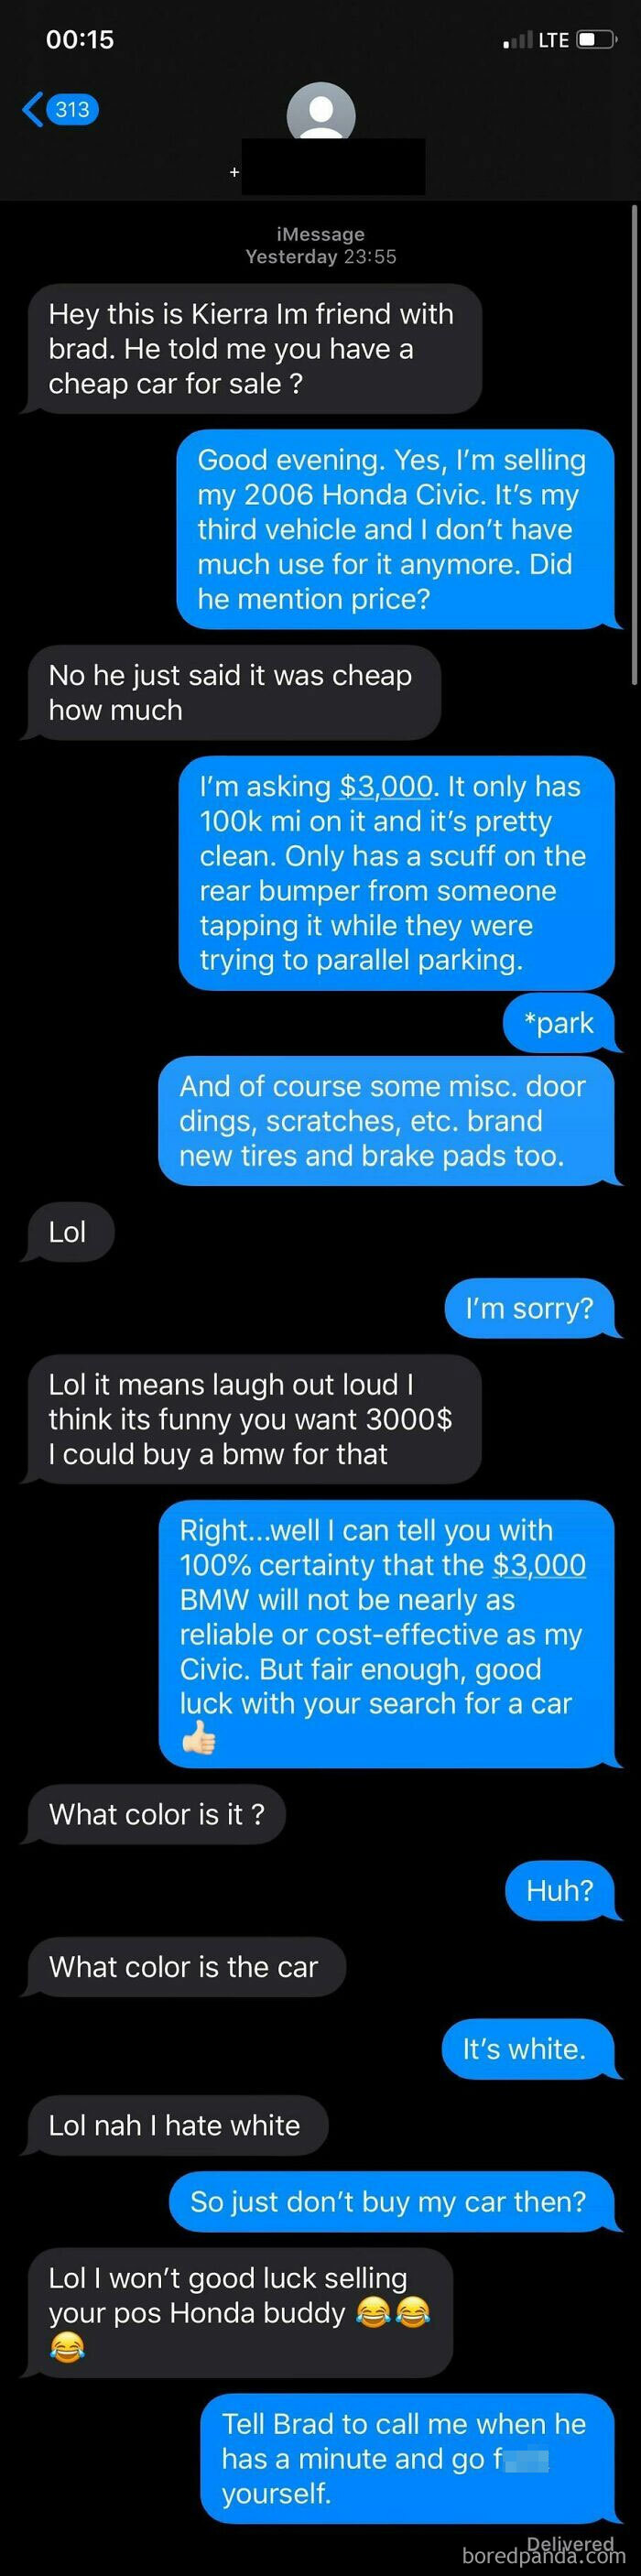 A Friend Of One Of My Employees Is Looking For A Cheap Car...i Tried So Hard To Keep My Cool